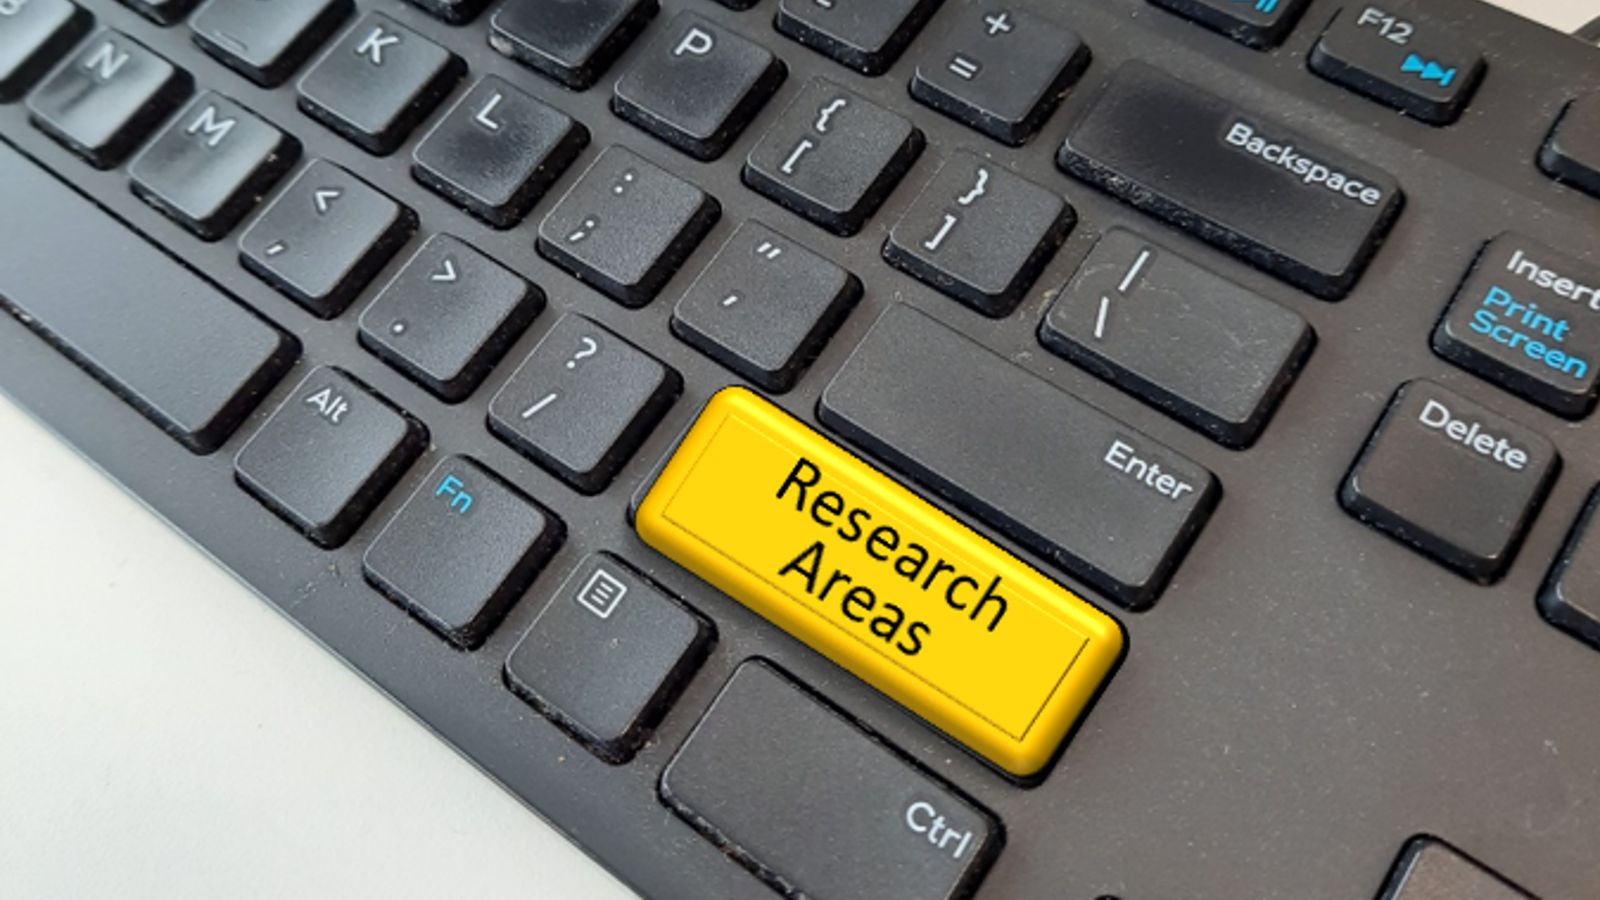 Close up of computer keyboard with fake yellow key saying 'Research areas'